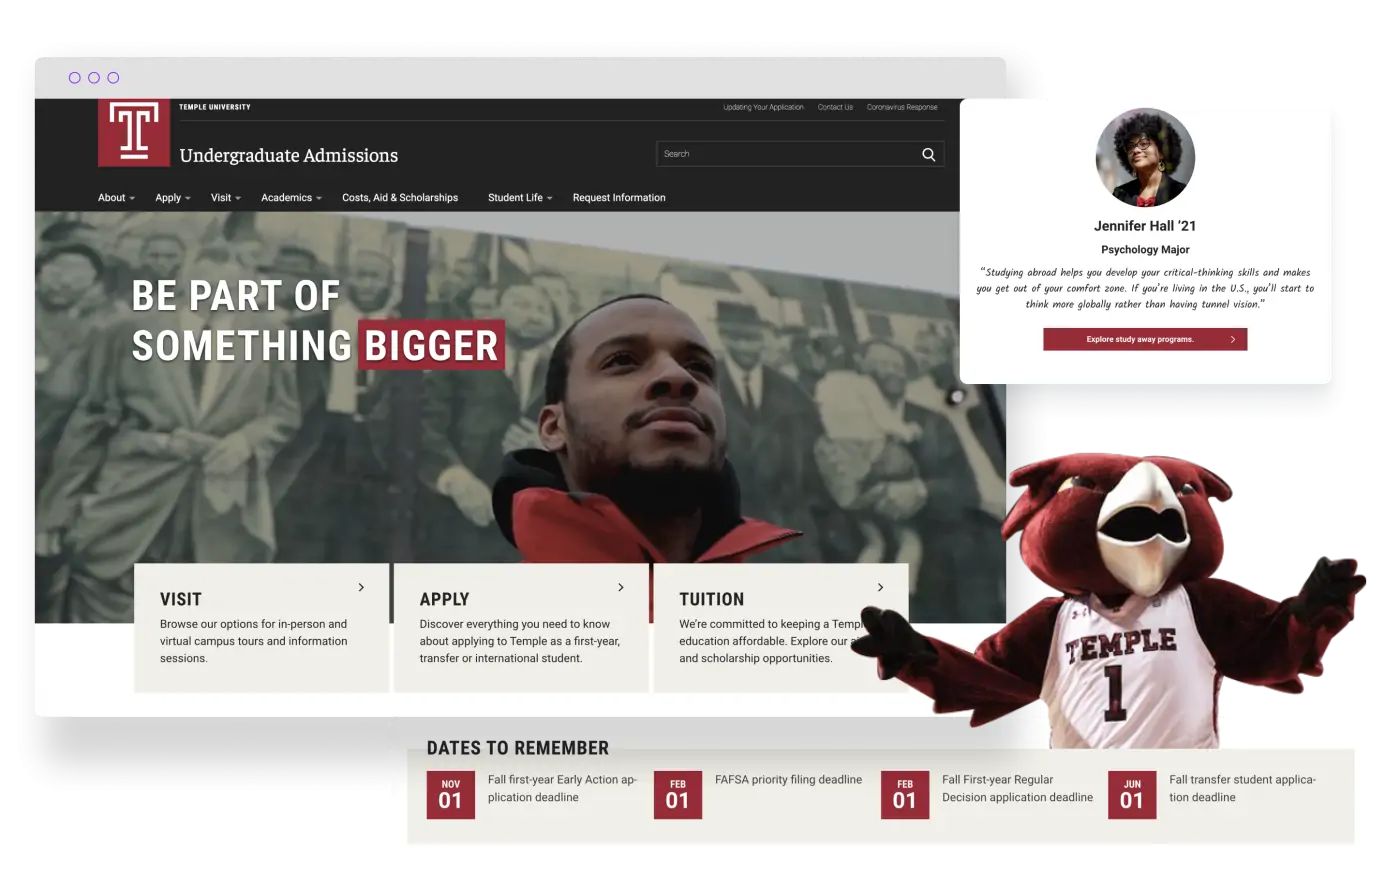 Design elements from Temple's Undergraduate Admissions landing page